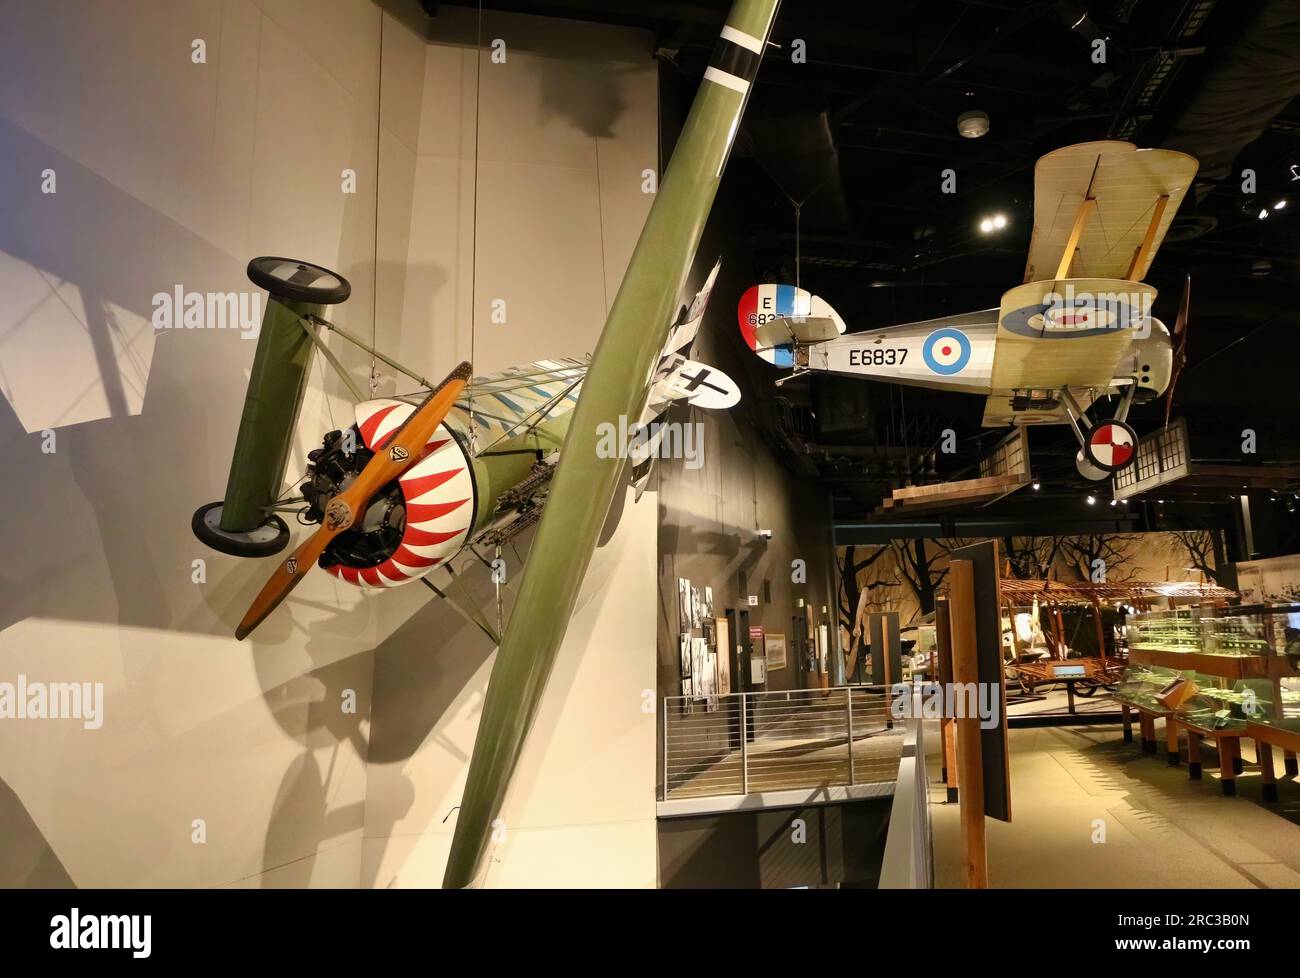 German WW1 fighter plane Fokker D.VIII Reproduction parasol-monoplane on display at The Museum of Flight Seattle Washington State USA Stock Photo